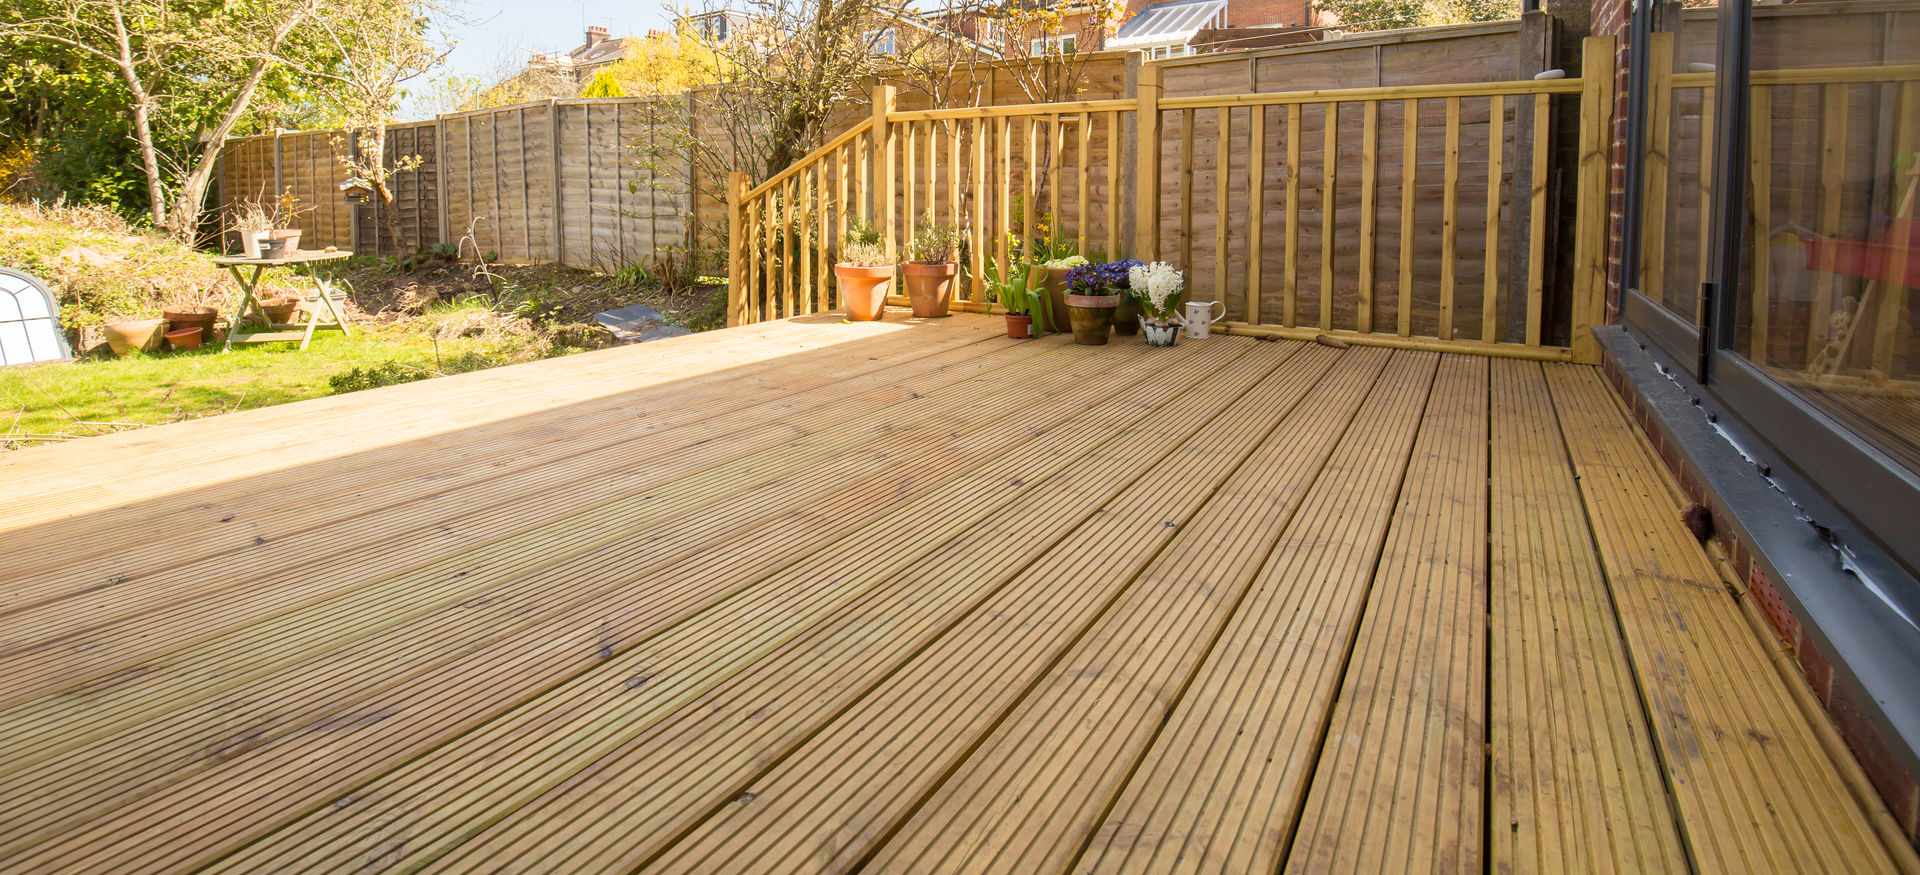 Can you imagine your summers out on this decking? homify ระเบียง, นอกชาน ไม้ Wood effect patio,decking,garden